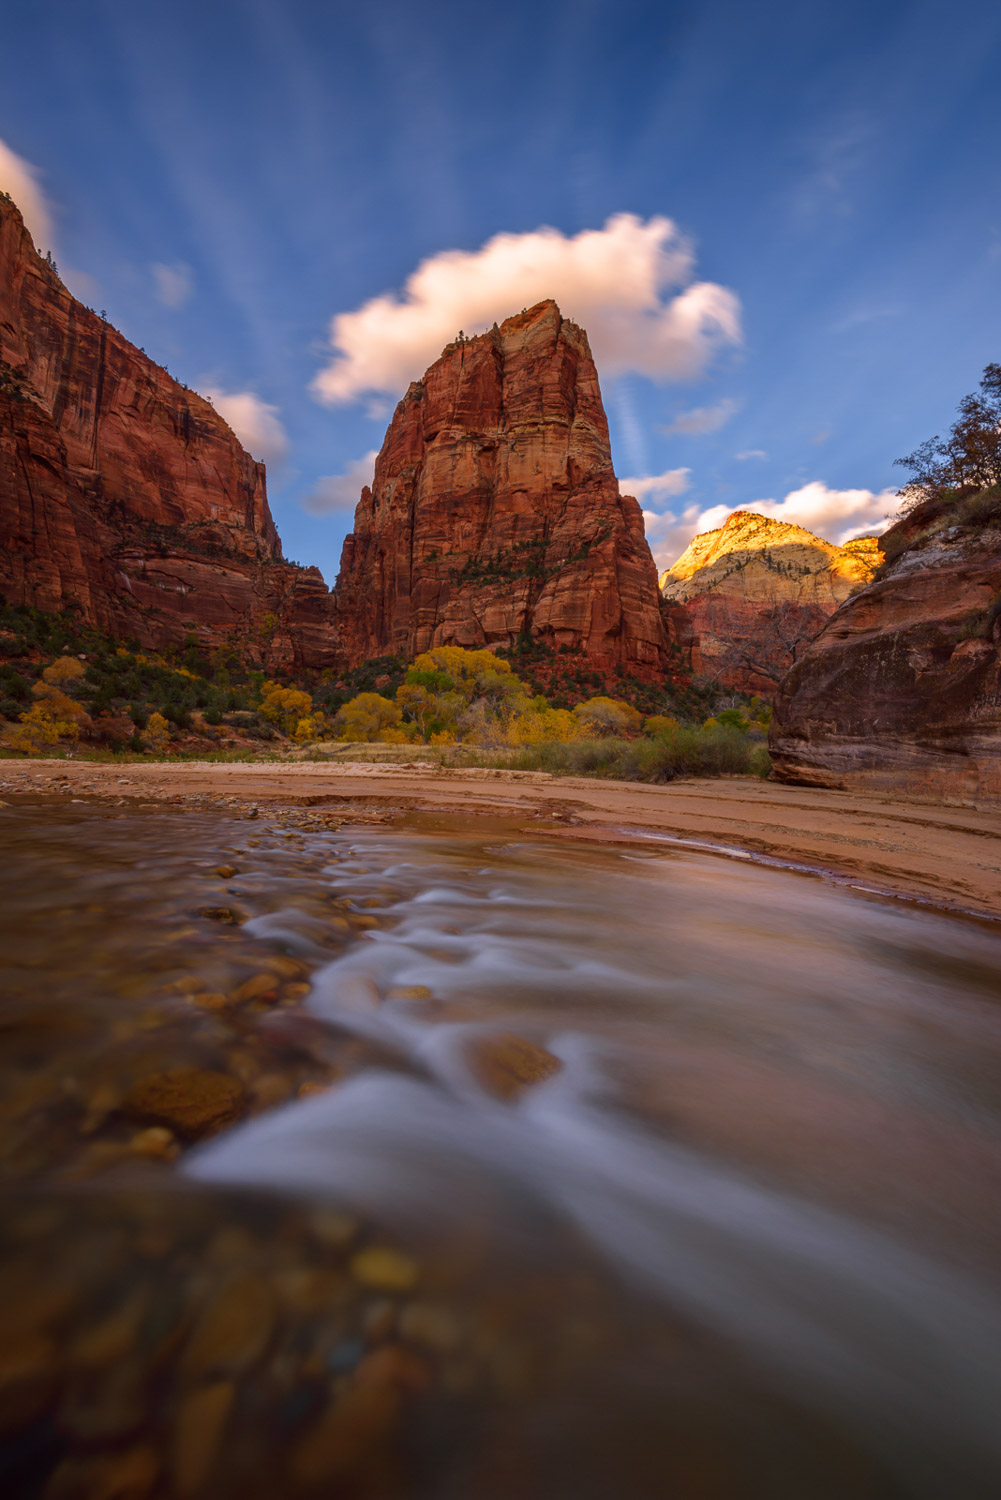 Angels Landing at sunset captured from the Virgin River in Zion National Park. Available Print Sizes: 12x18,16x24,20x30,24x36...